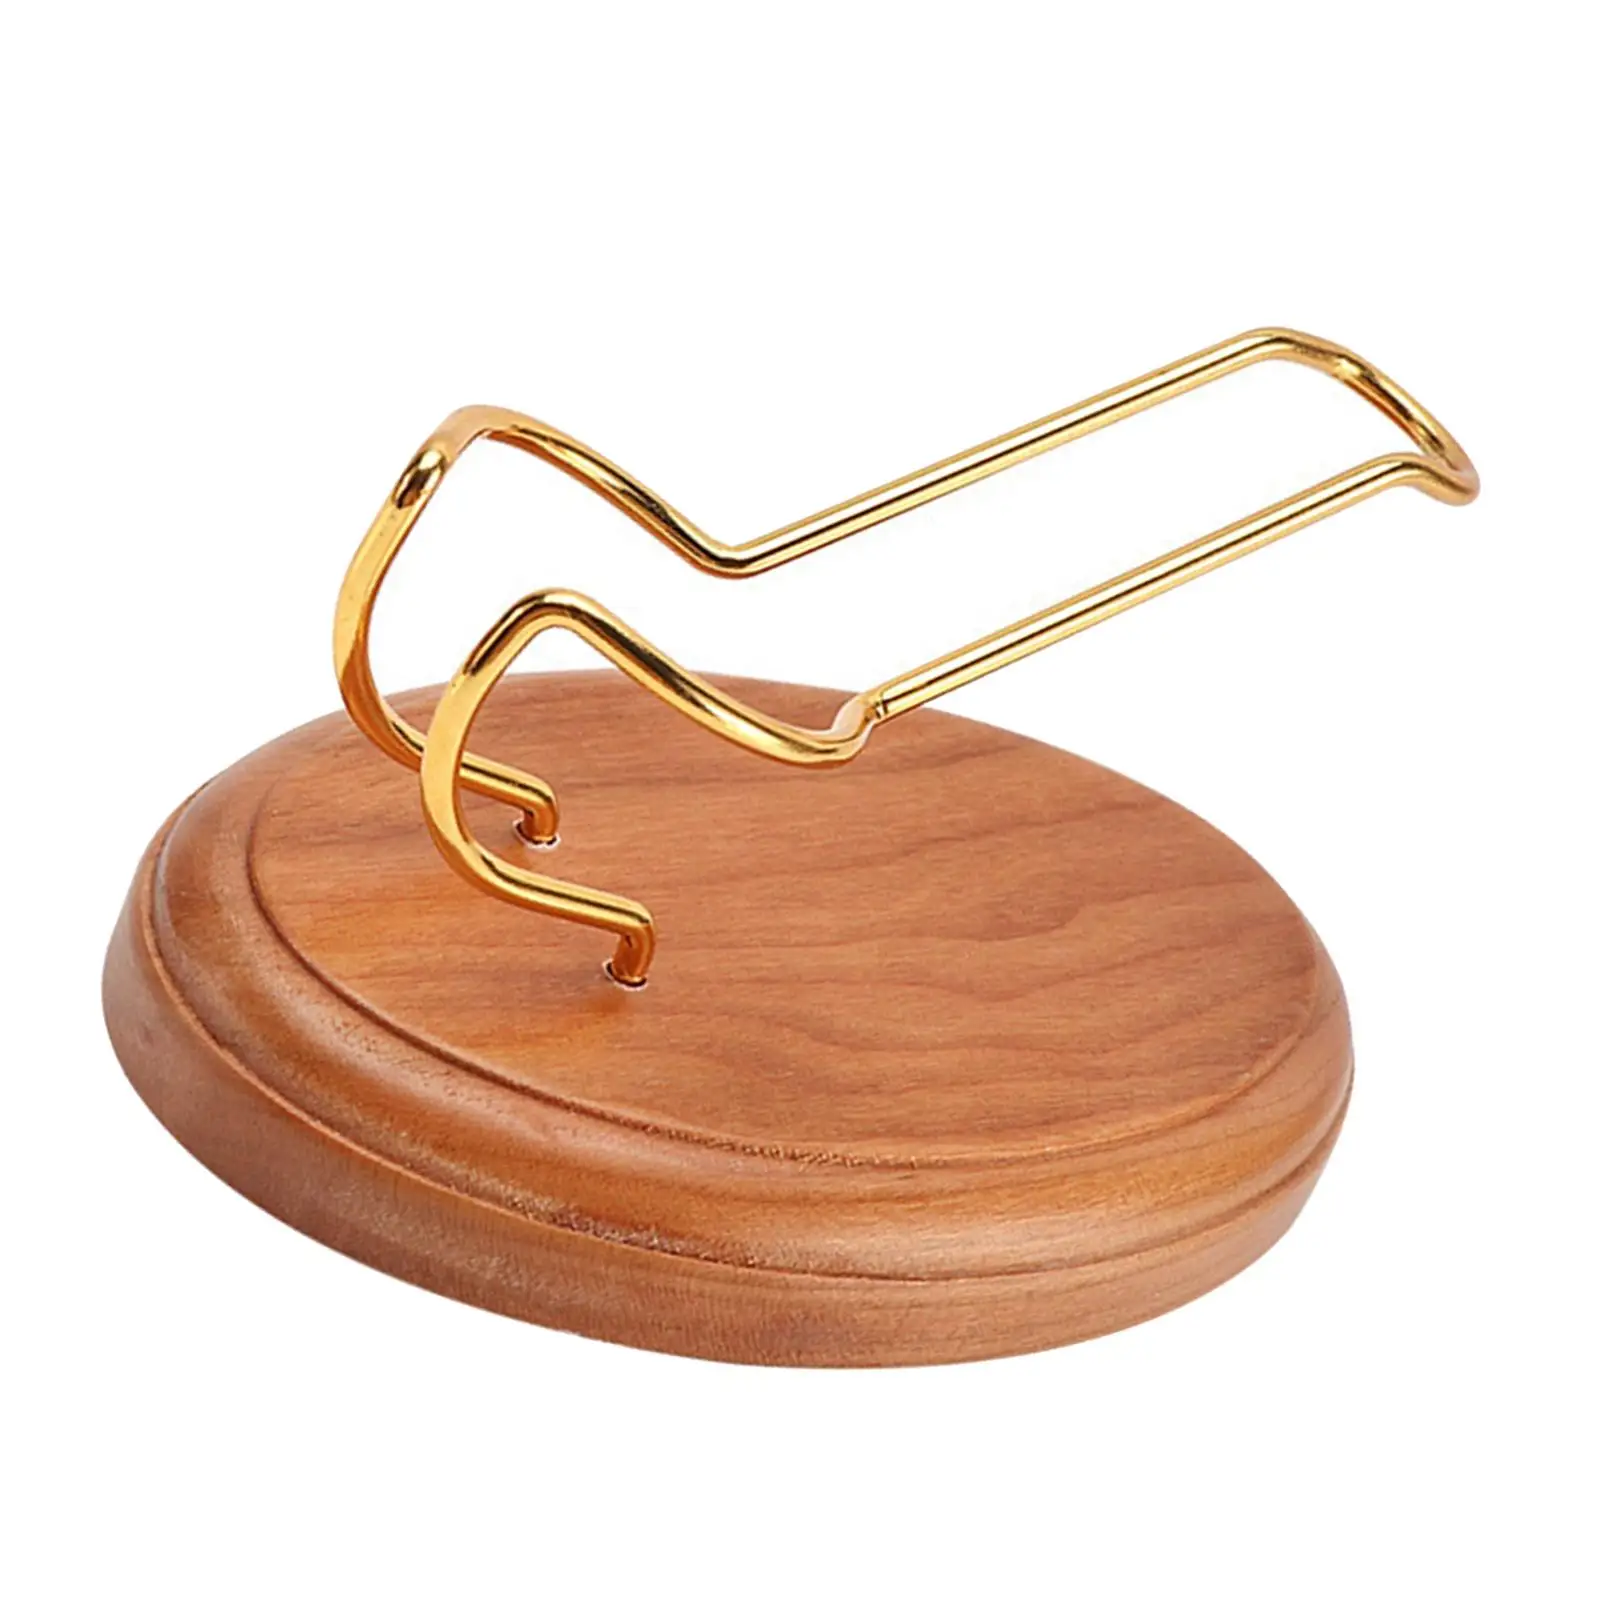 Natural CHERRY Wood Cigarette Pipe Holder Display Rack for Families Hotel